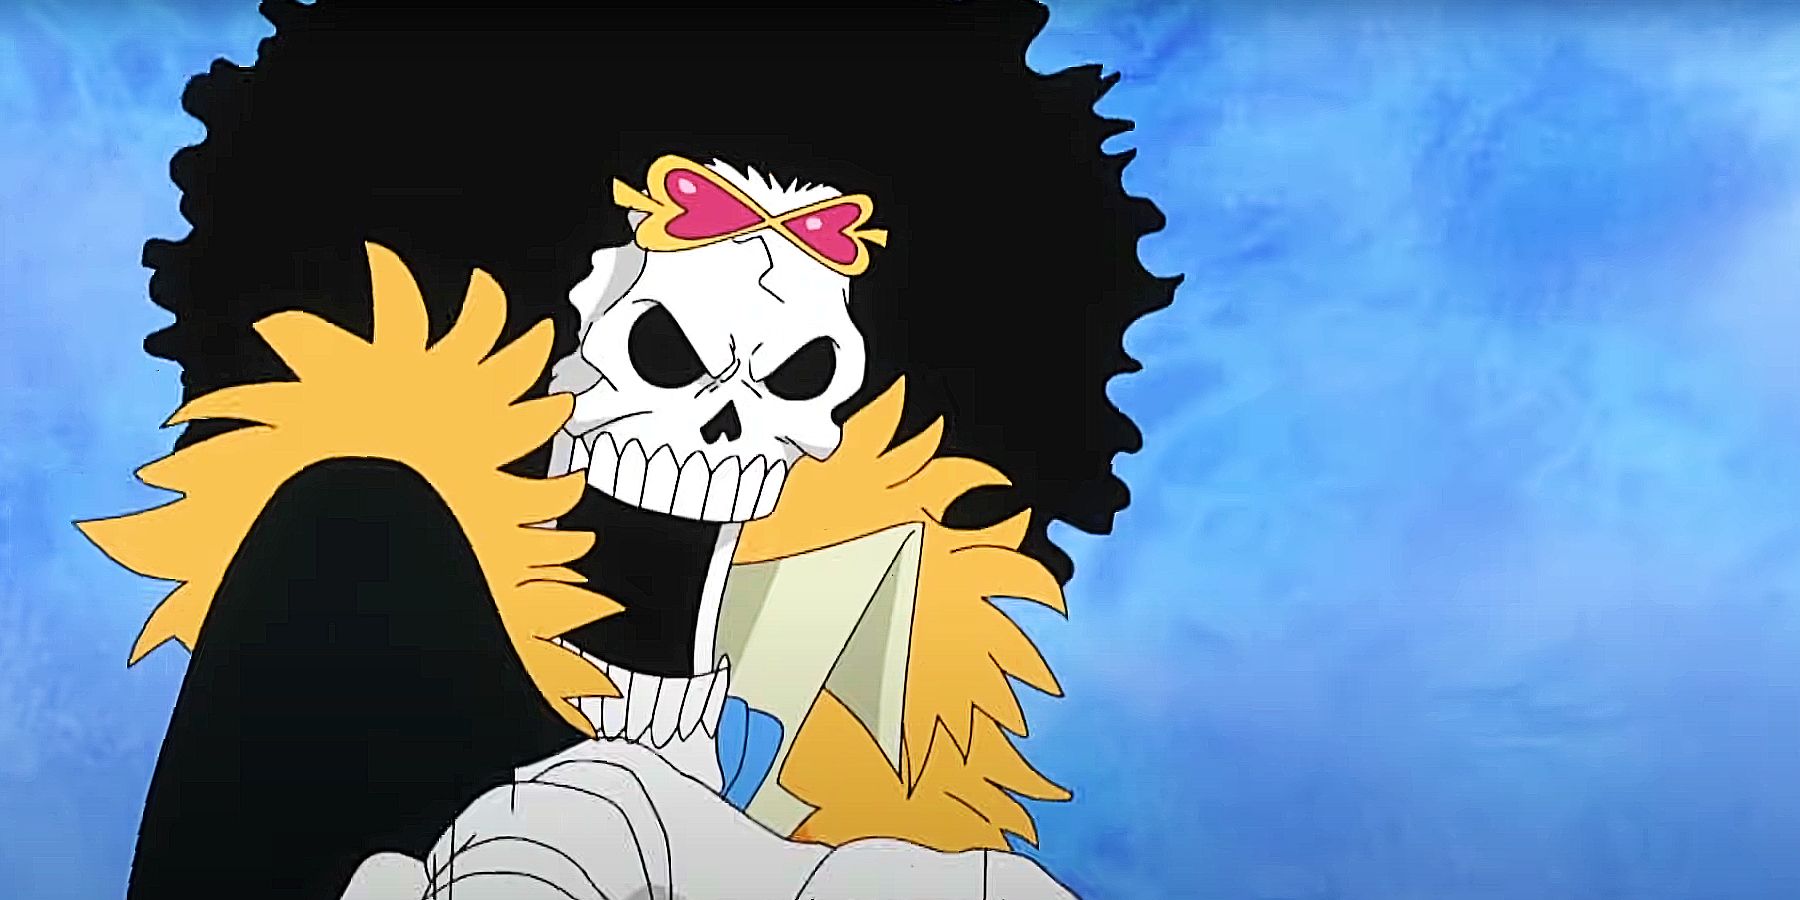 Brook looking evil in the One Piece anime.